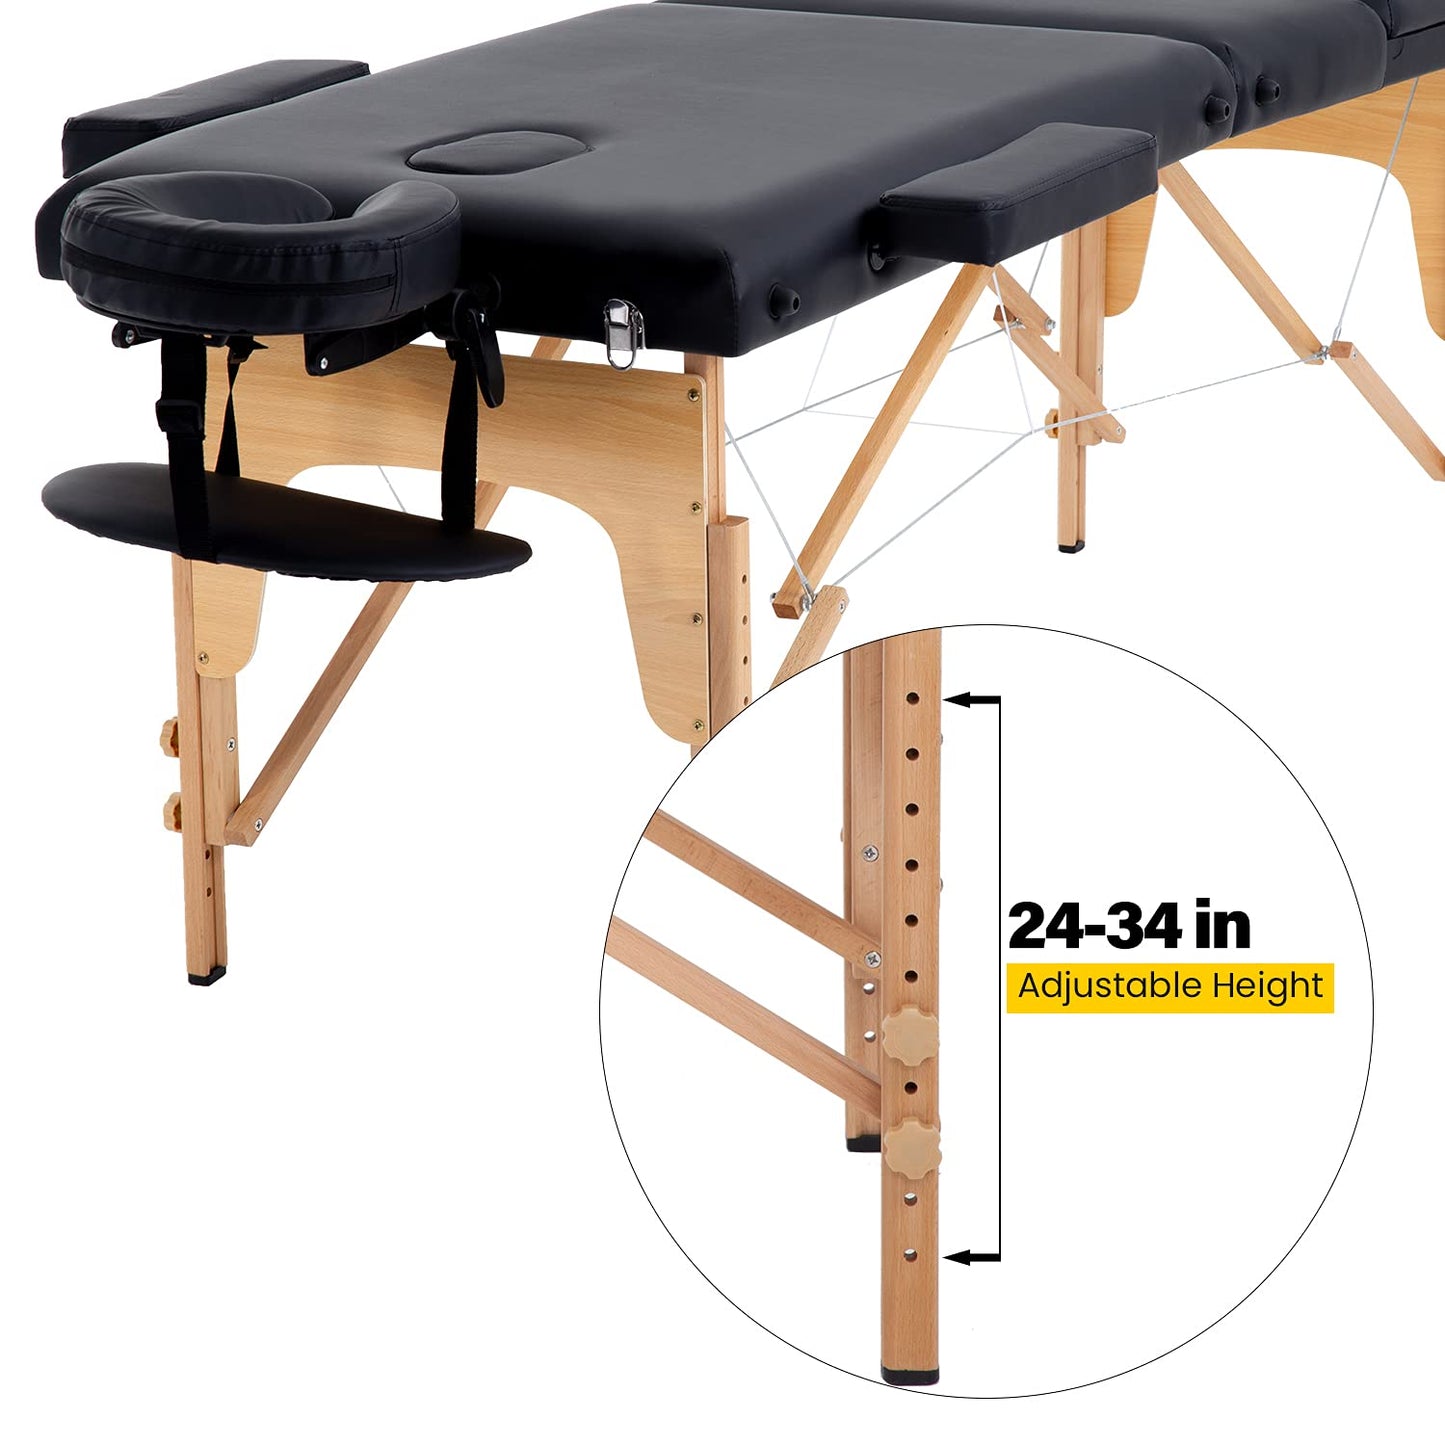 Professional Portable Spa Foldable Wooden Massage Table With Carry Bag - 3 Fold (Premium)